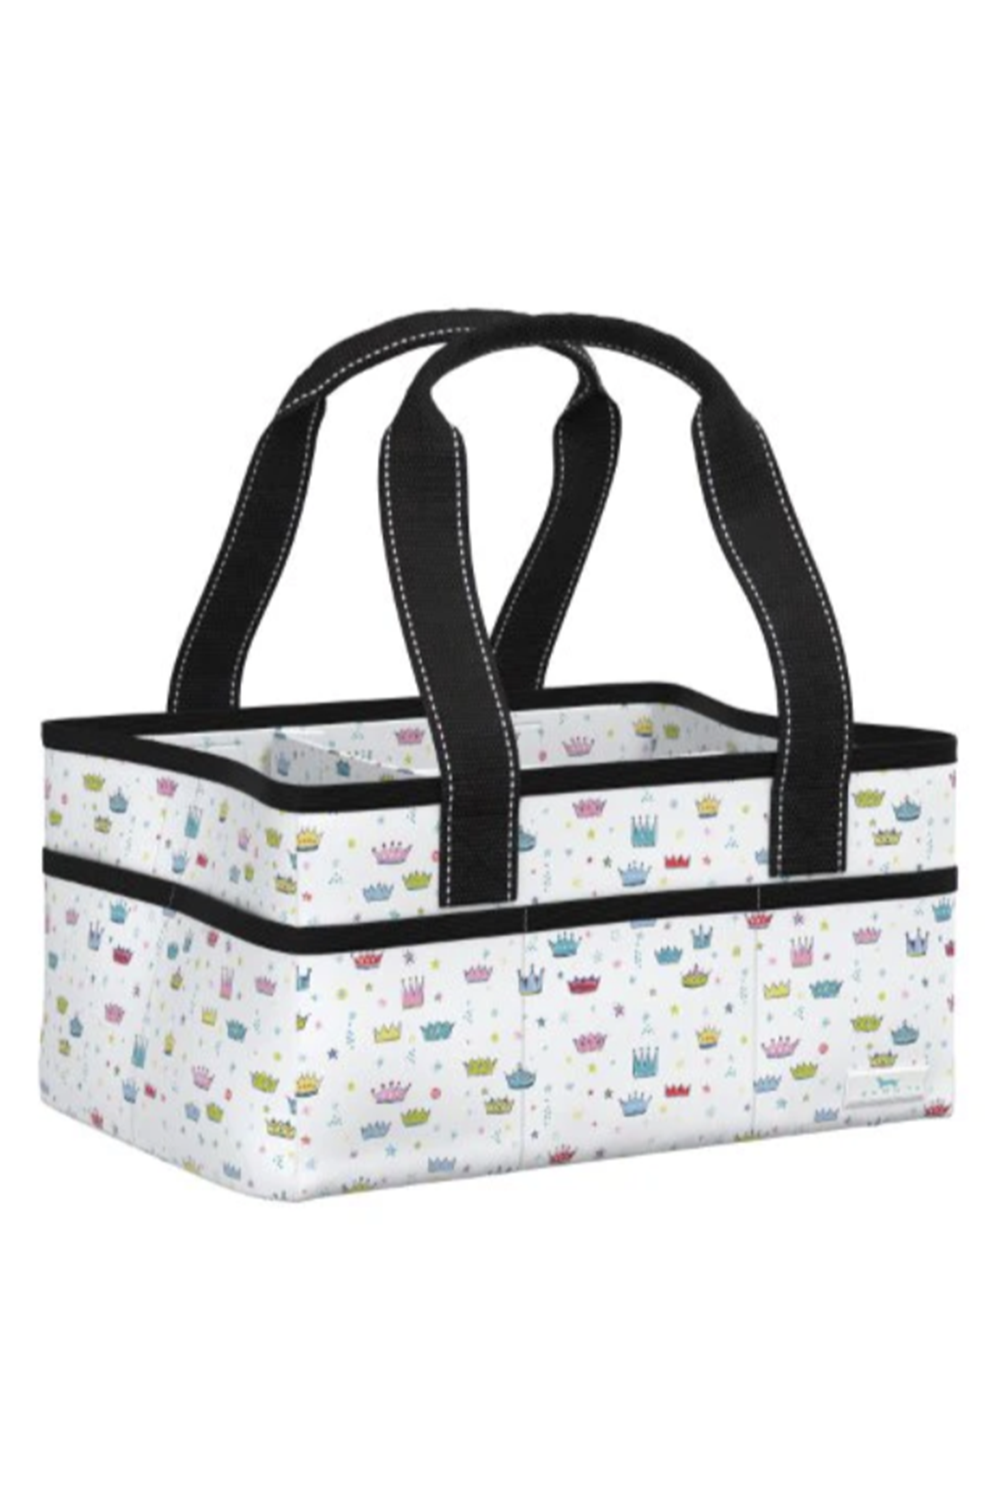 Hiney Helper Diaper Caddy - "Family Jewels" BBY23